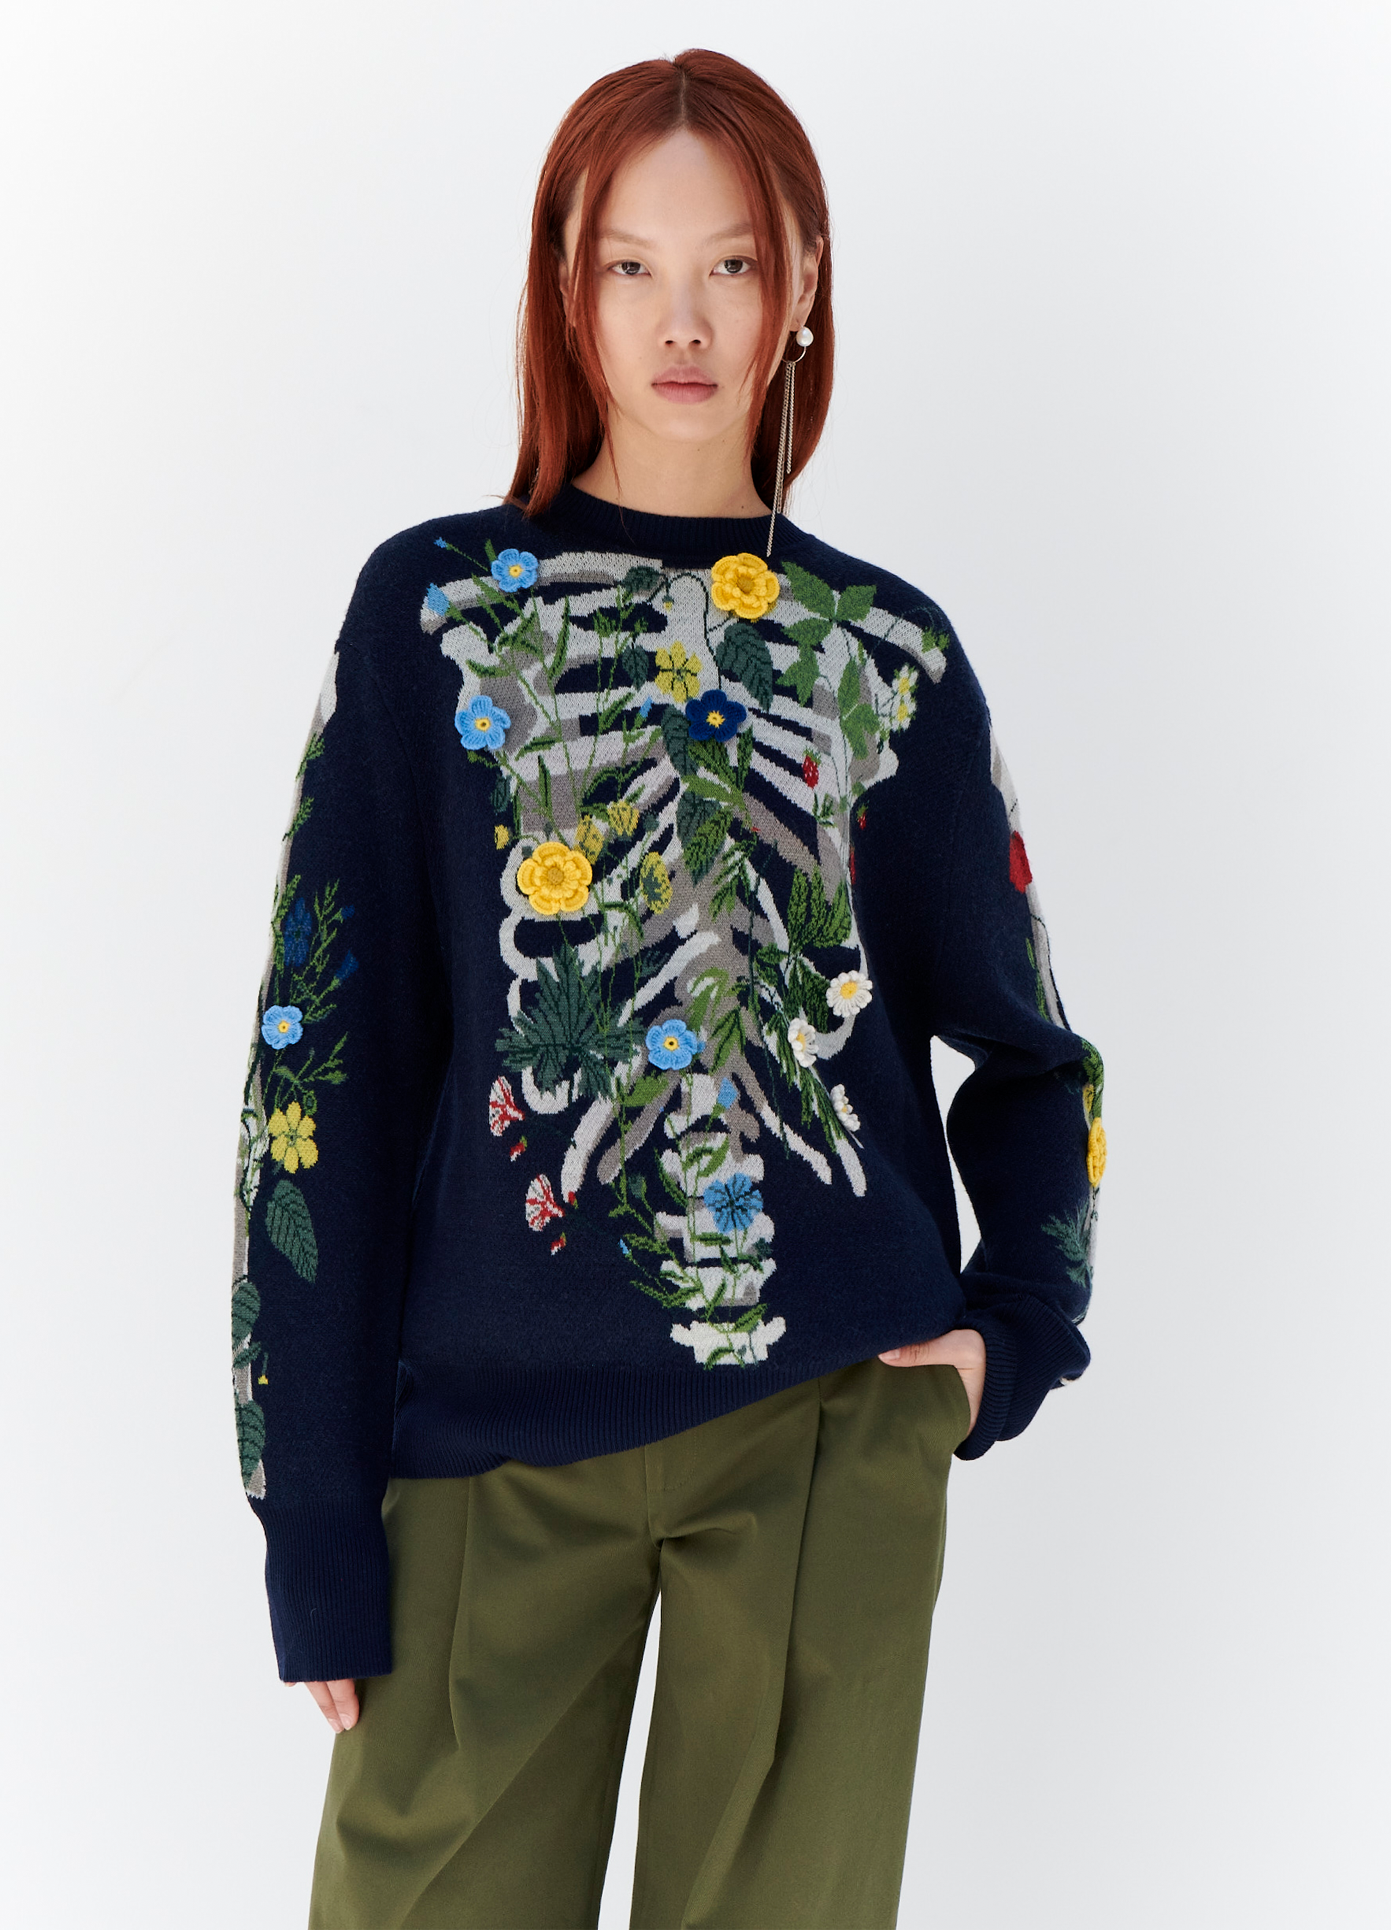 MONSE Floral Skeleton Sweater in Navy on model full front view